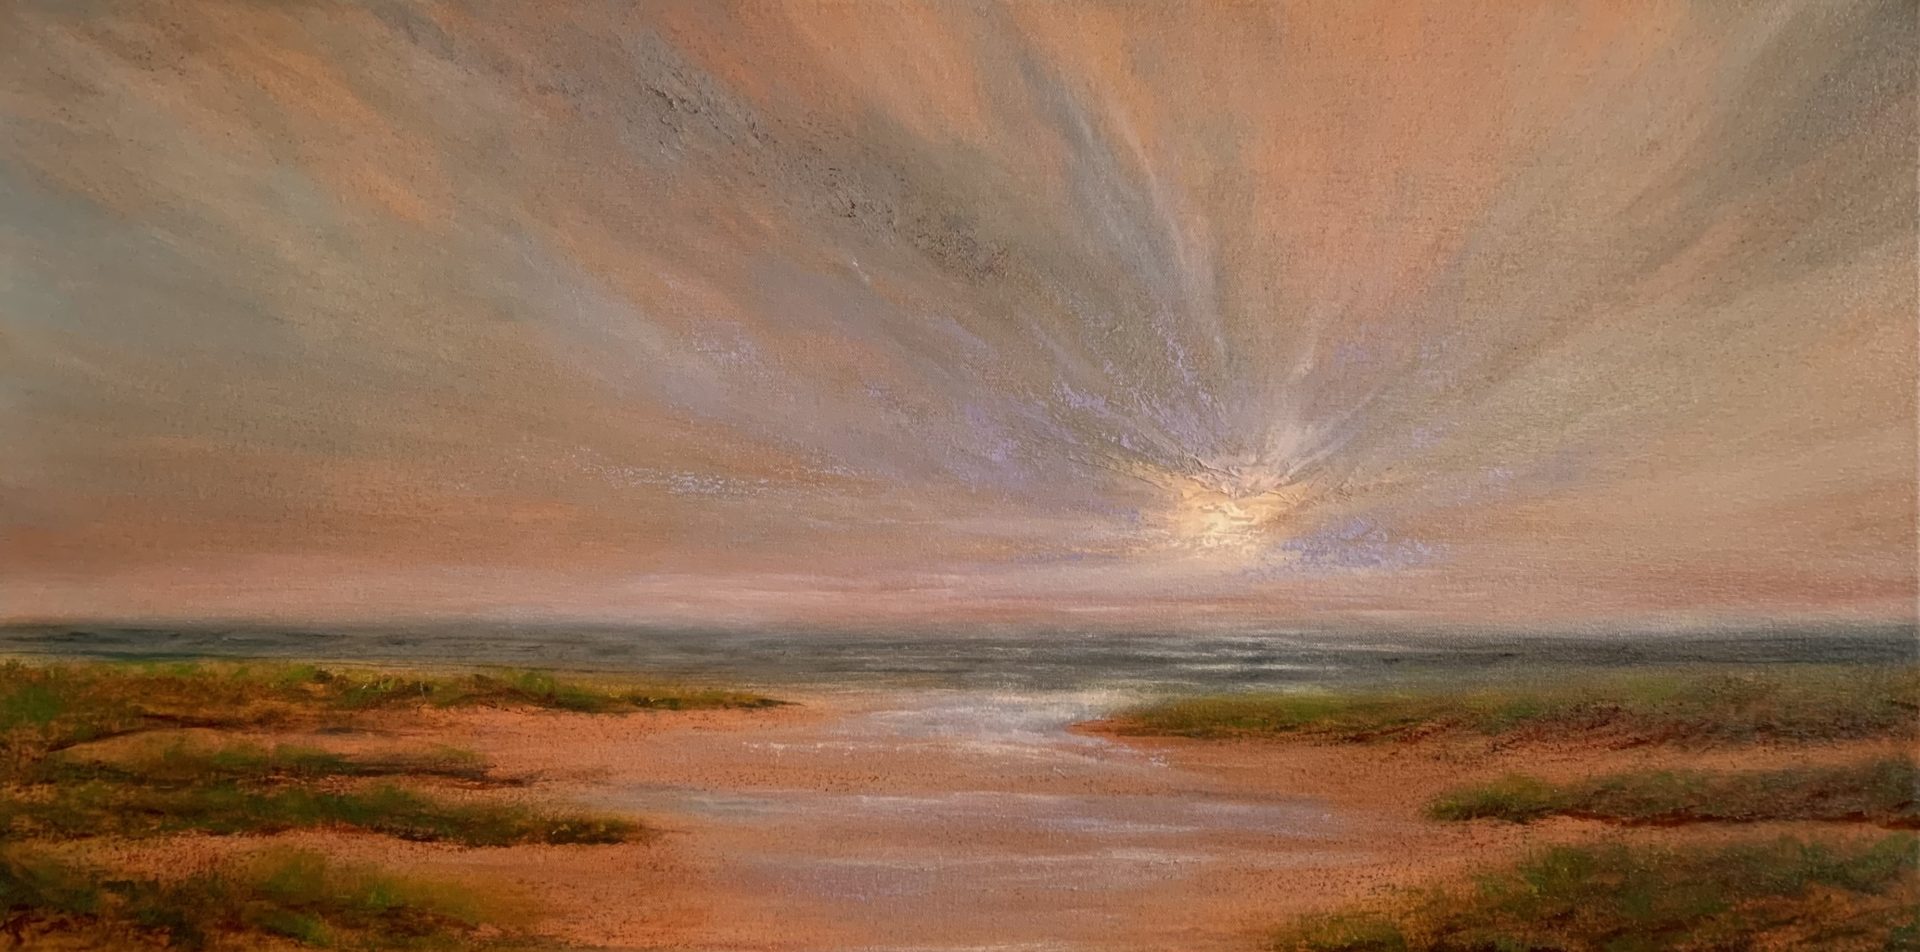 Original seascape oil painting by Tisha Mark, "Early Bright (Week 33, 52 Weeks of Finding Light Series), 18"x36" oil on canvas (2023). This painting features a brilliant sunrise sky over a seashore. The warm tones of the sky and sand complement the cool blue sea and pops of green seagrass, creating a scene that is simultaneously peaceful and energetic.